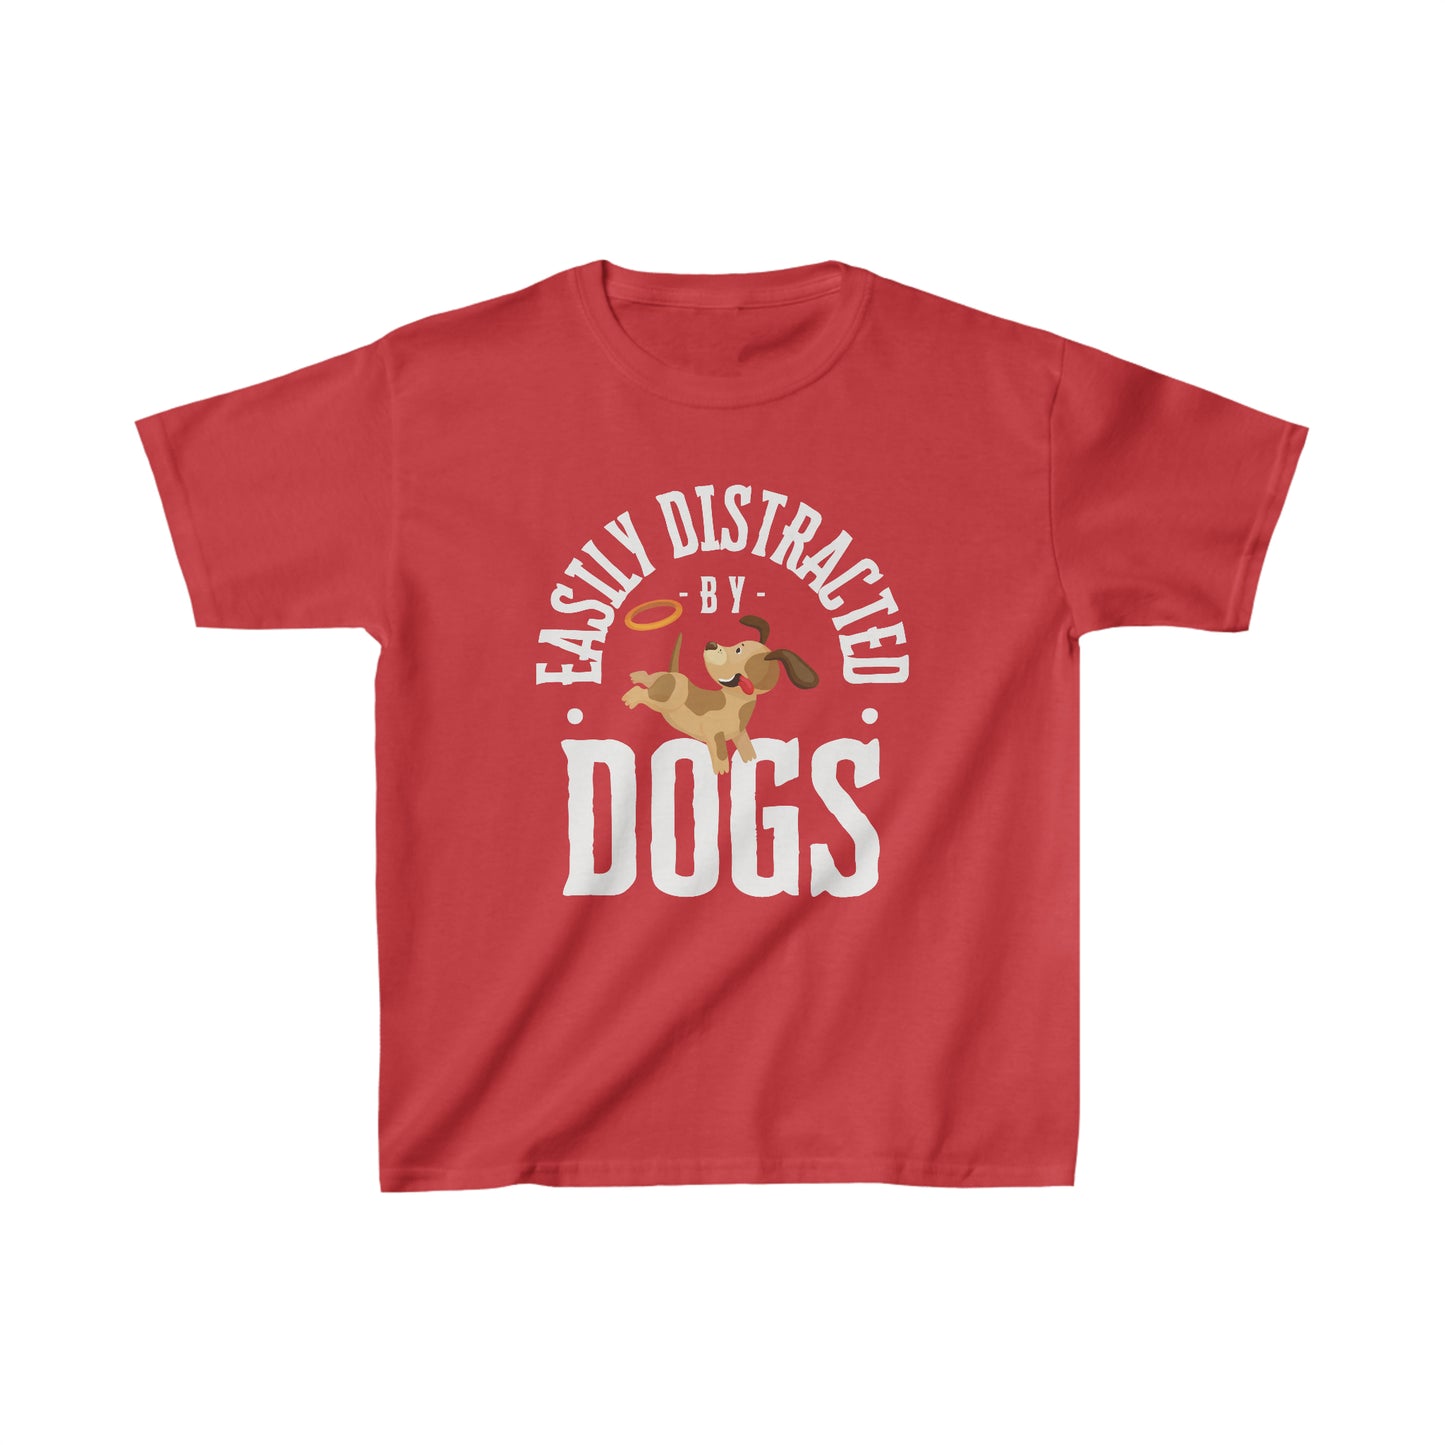 Against a white backdrop, a Dogs Pure Love red unisex kids t-shirt displays a cute graphic and playful slogan 'Easily Distracted by Dogs.'